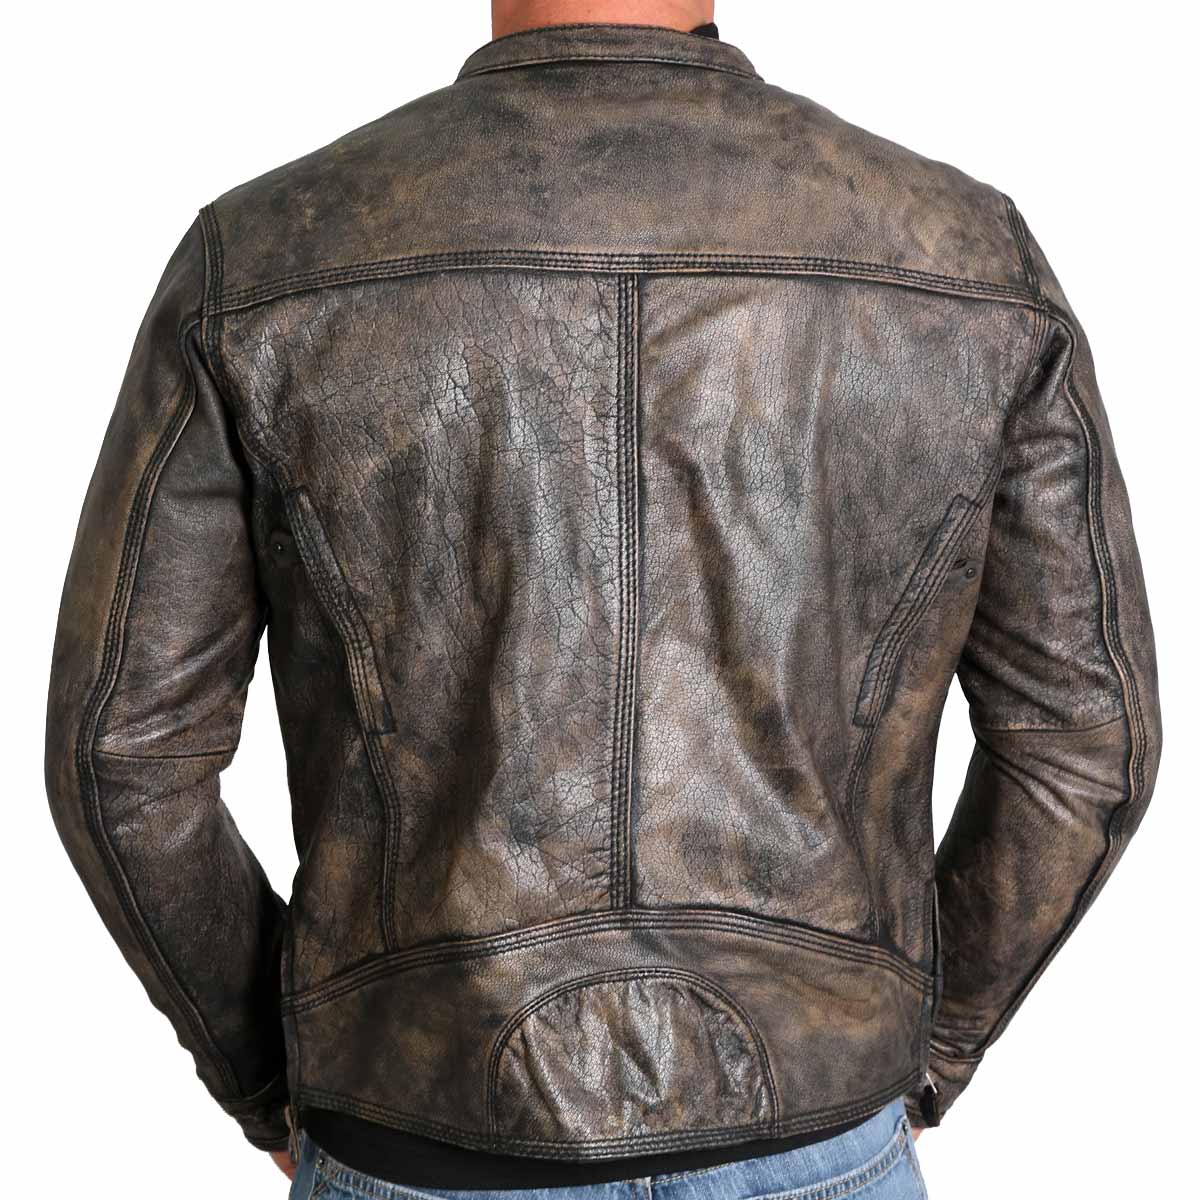 Hot Leathers JKM1019 Men's Distressed Brown Leather Jacket with Gun